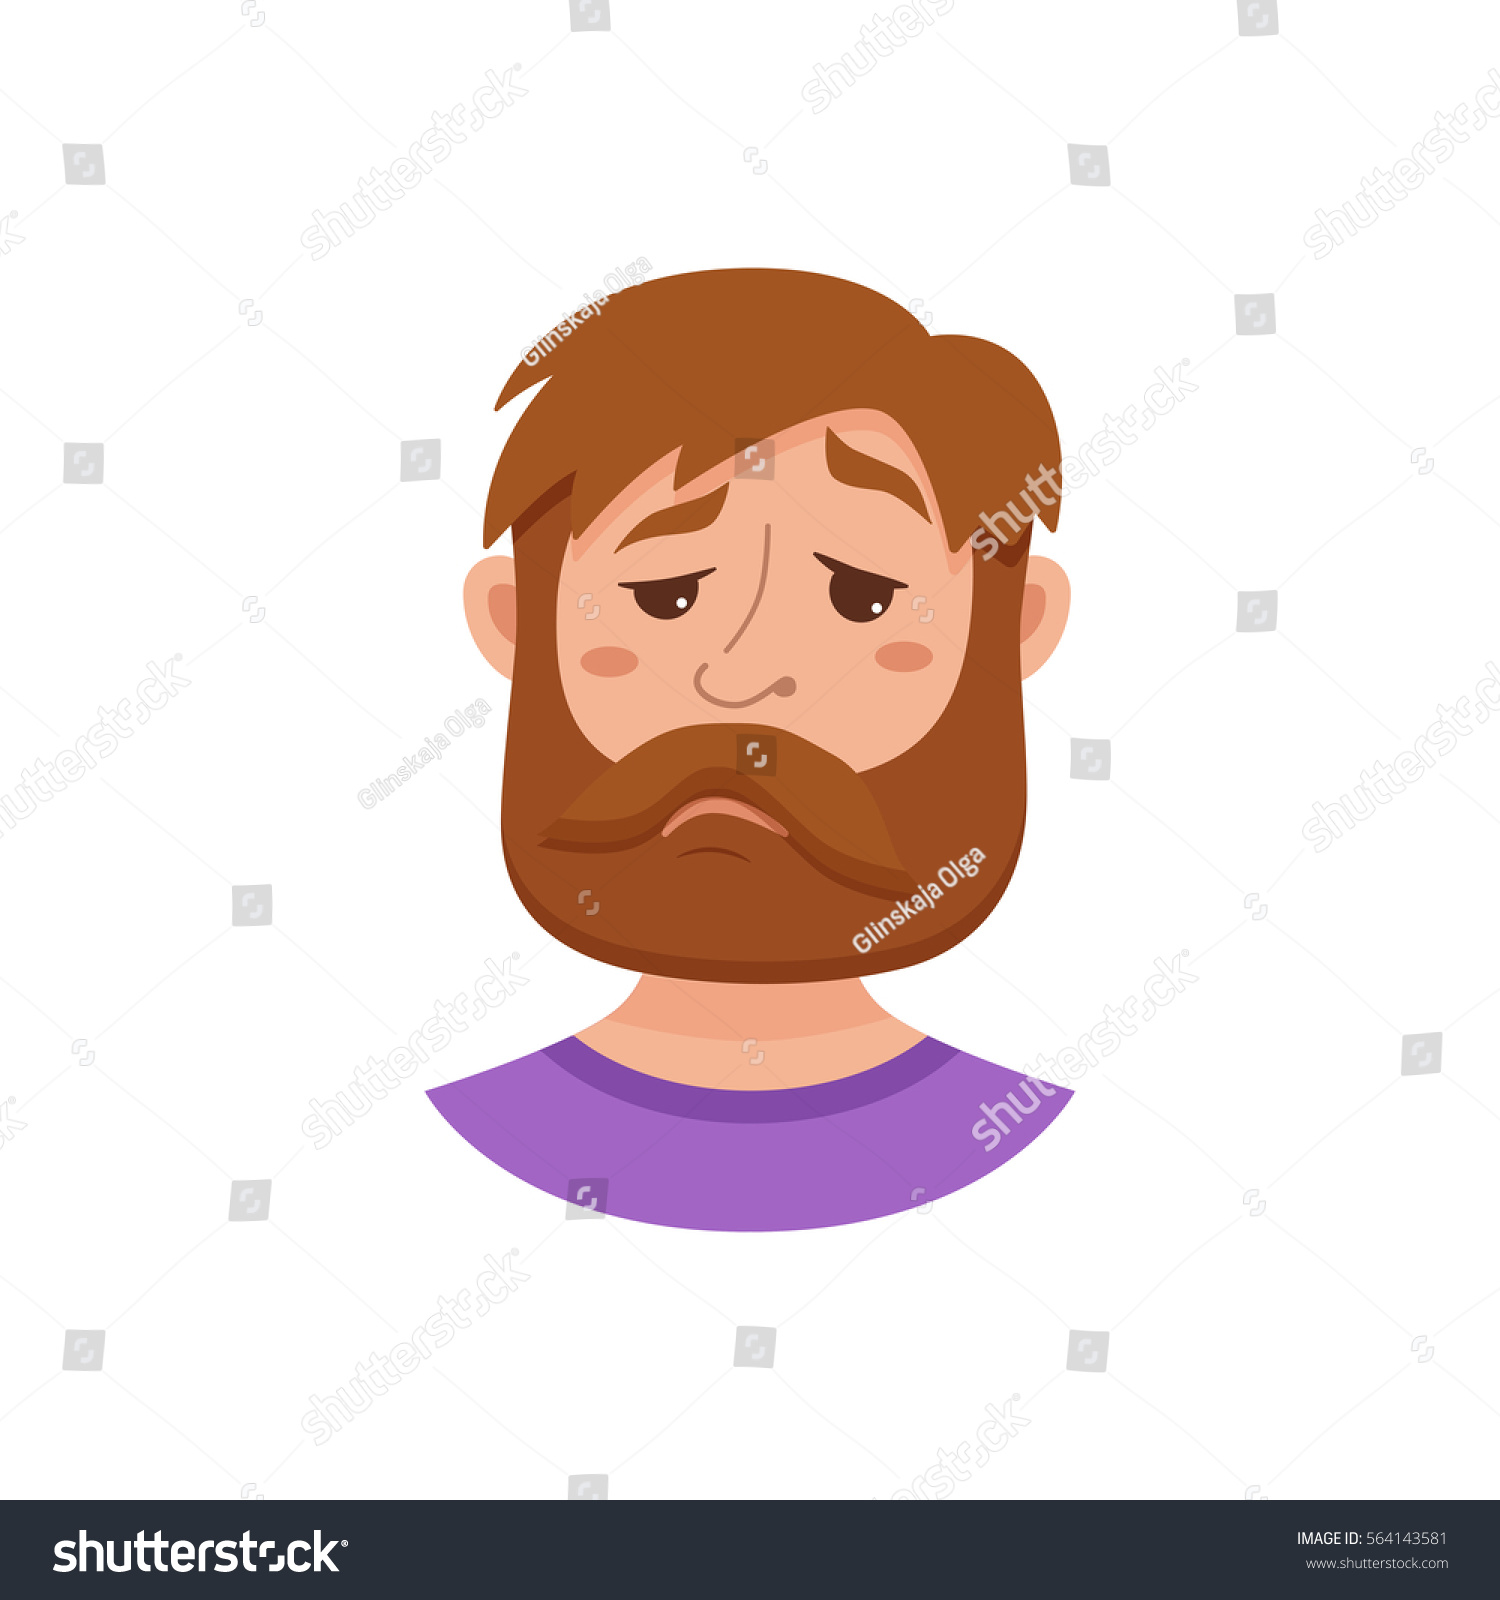 Beard Men Facial Expression Isolated Icon Stock Vector Royalty Free 564143581 Shutterstock